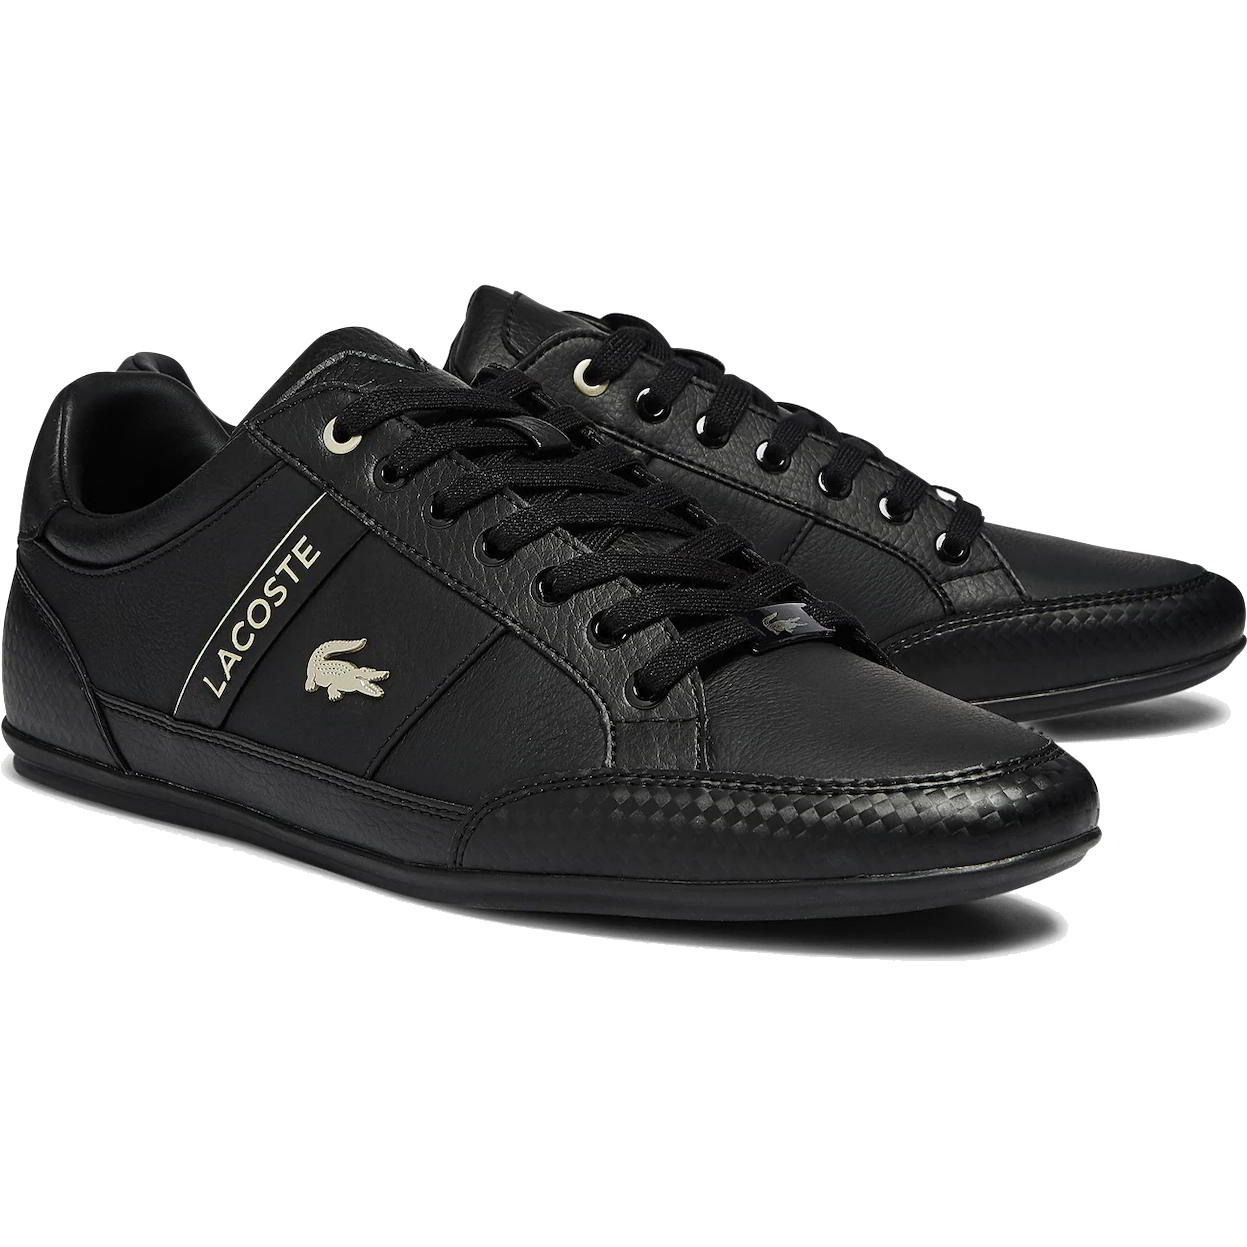 Lacoste Mens Chaymon 721 Tainers Shoes - UK 8.5 Black 2951